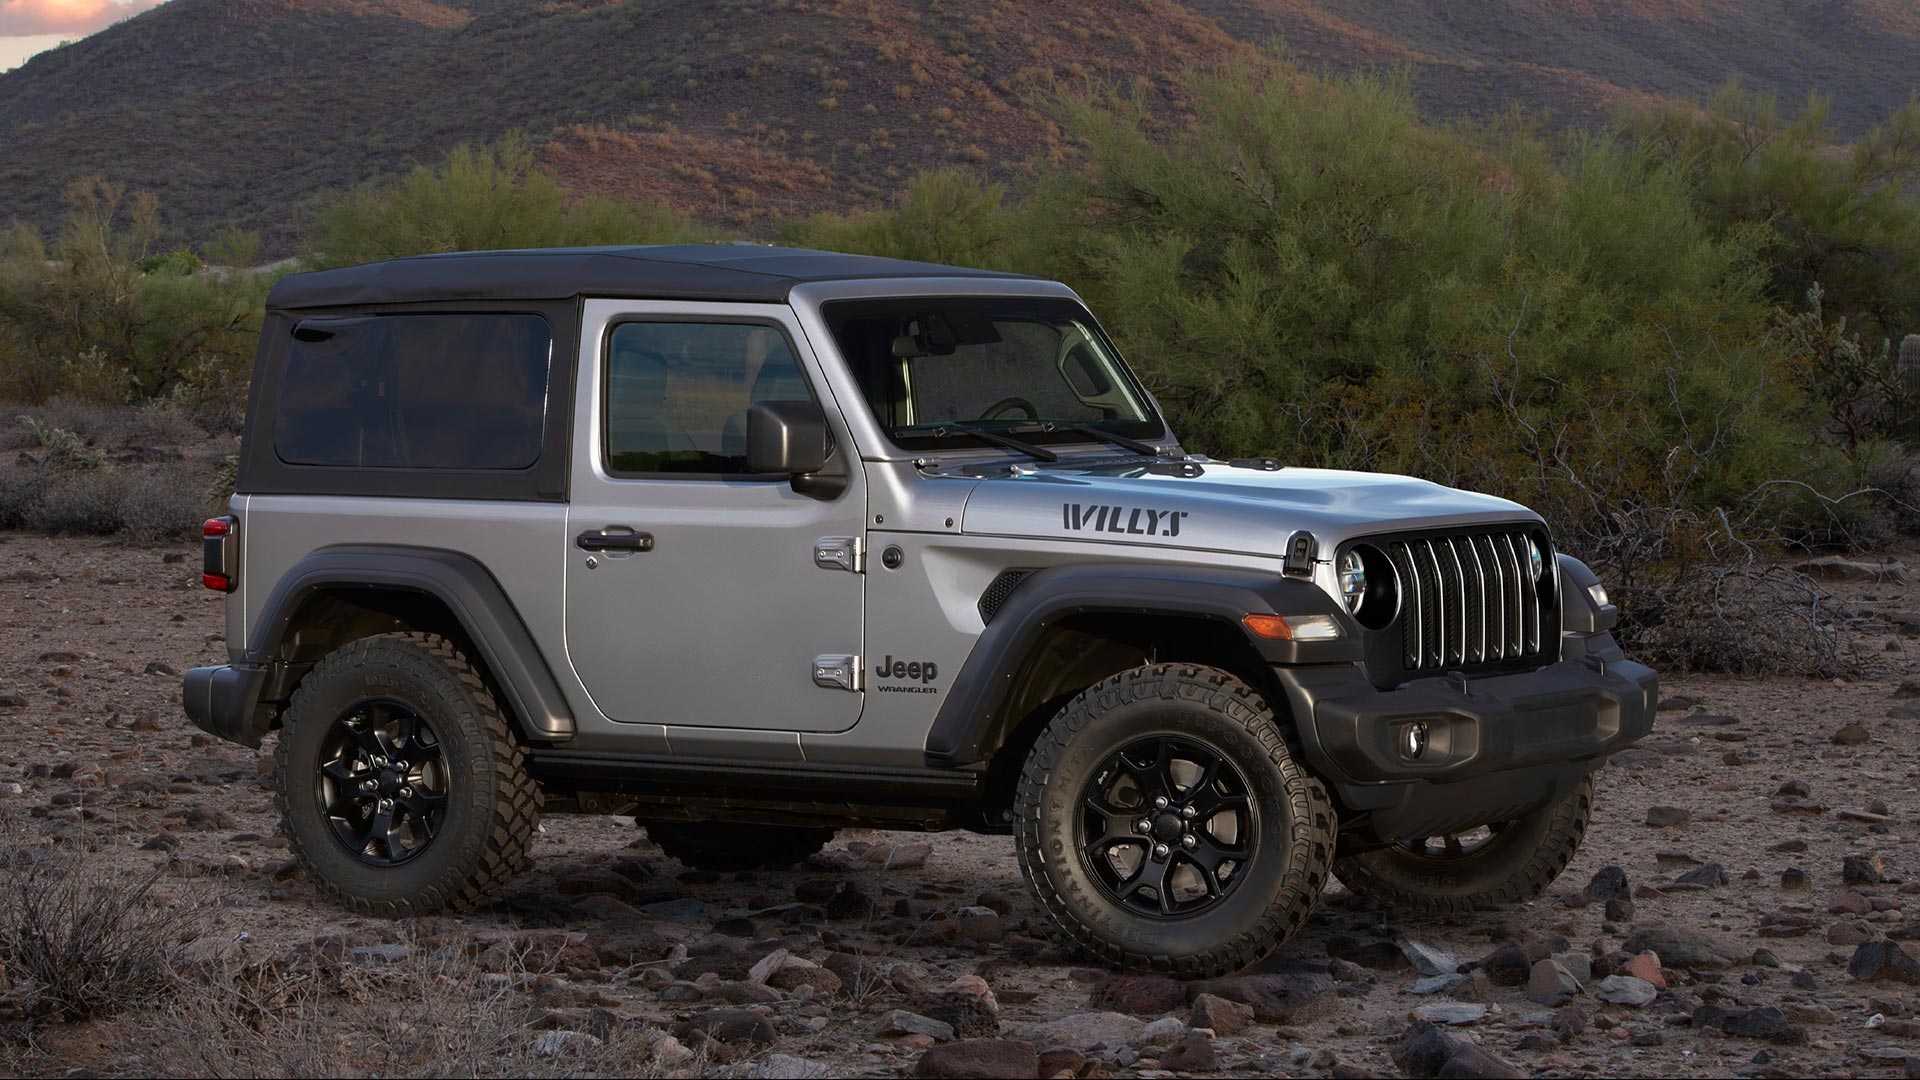 Jeep Wrangler Willys Edition Wallpaper (HD Image)